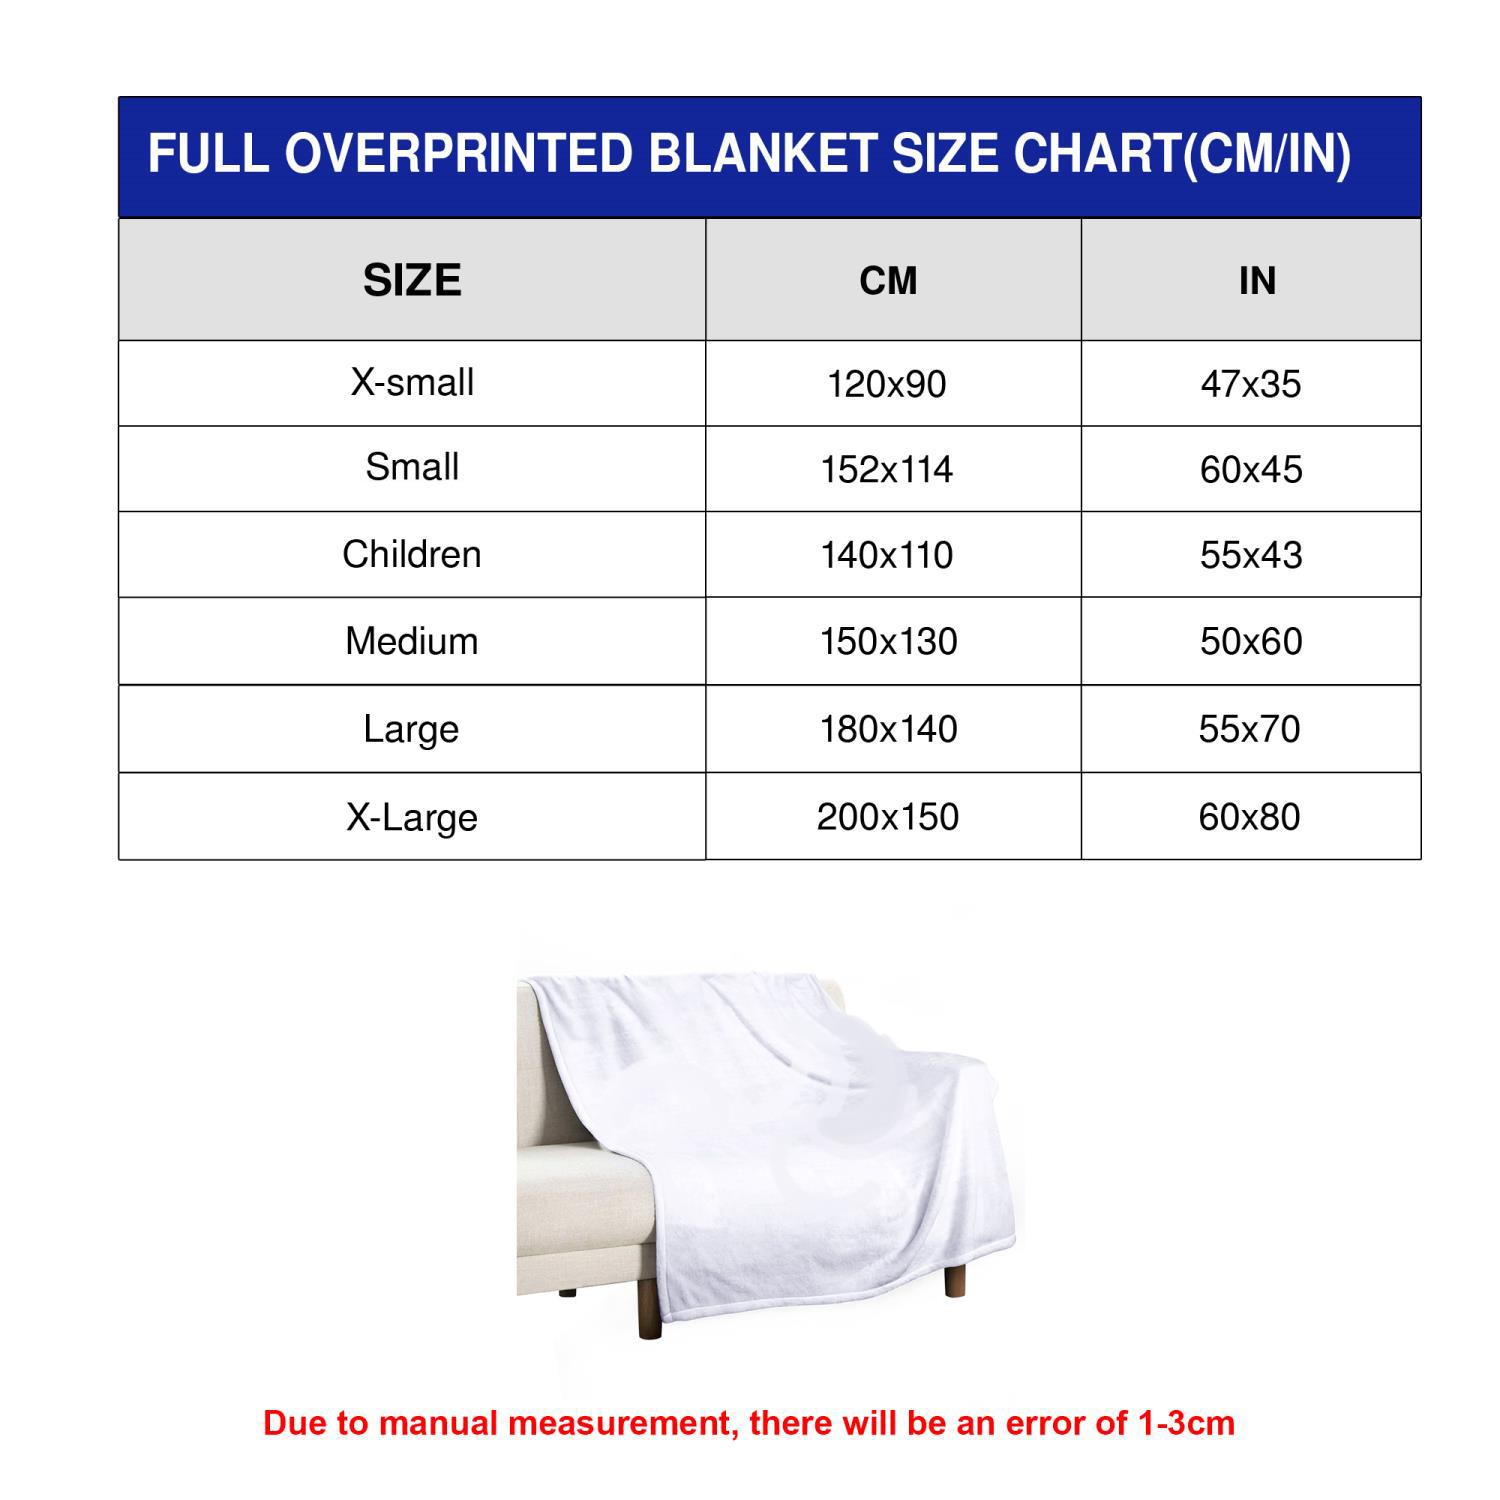 Blessed By The Amazing Grace Of God Gift Ideas For Christians Blanket